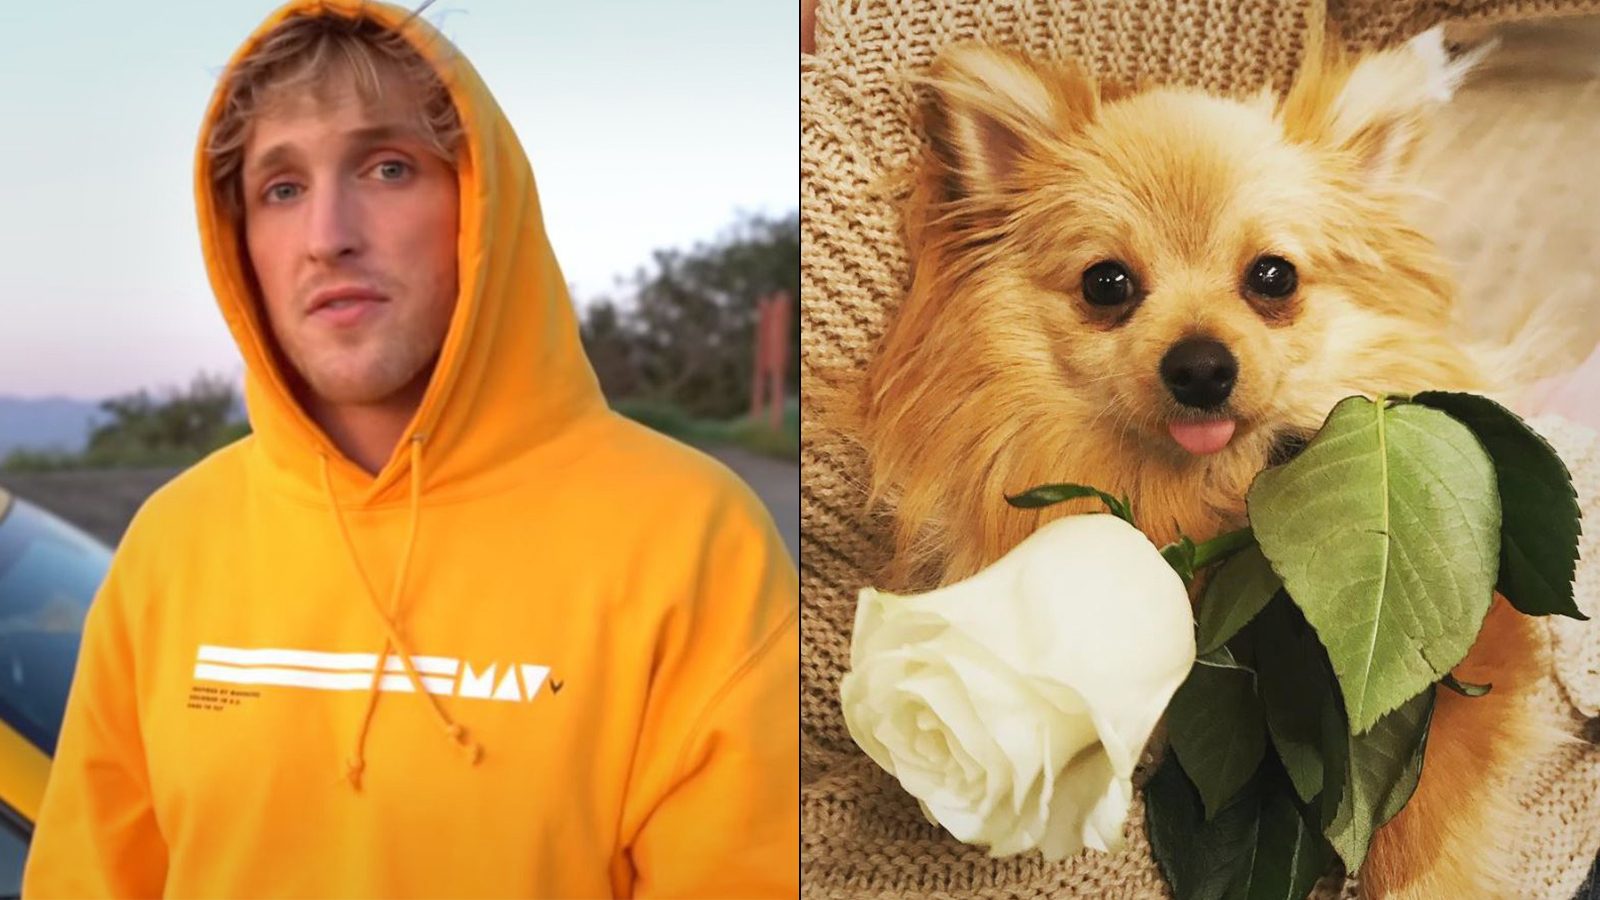 Logan Paul mourns loss of dog after fatal coyote attack Dexertocom